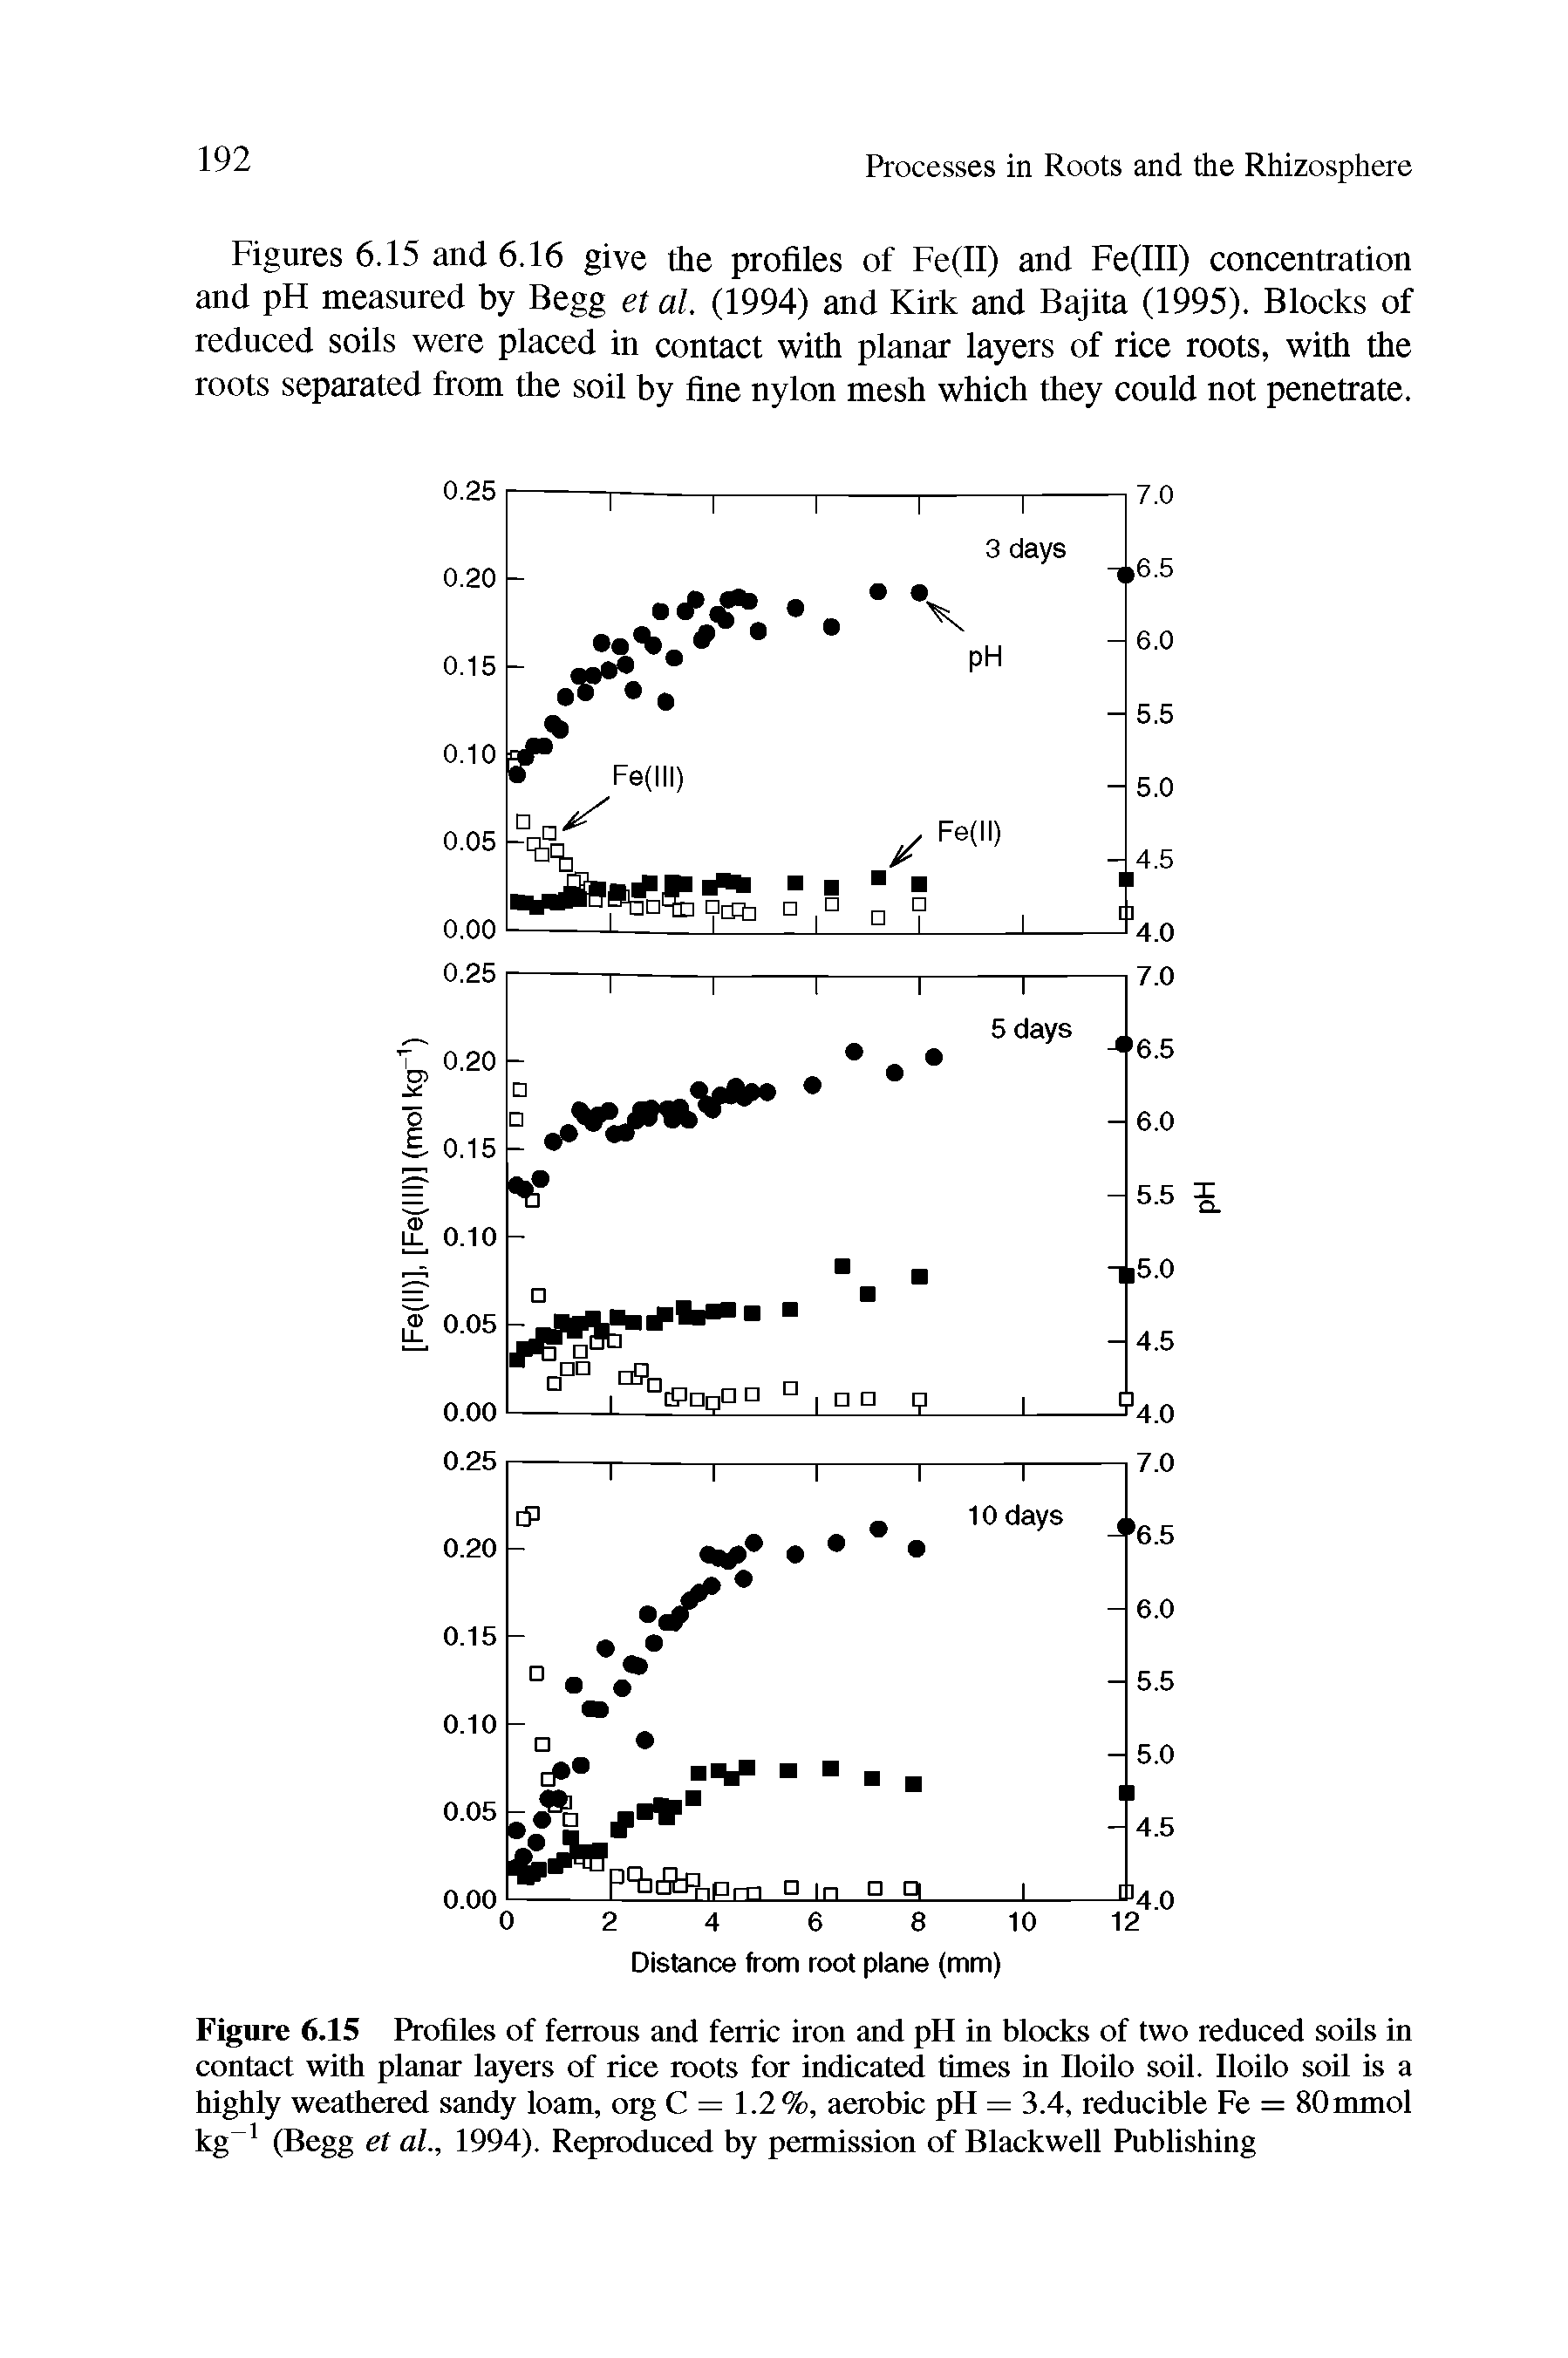 Figure 6.15 Profiles of ferrous and ferric iron and pH in blocks of two reduced soils in contact with planar layers of rice roots for indicated times in Iloilo soil. Iloilo soil is a highly weathered sandy loam, org C = 1.2%, aerobic pH = 3.4, reducible Fe = 80 mmol kg (Begg et al., 1994). Reproduced by permission of Blackwell Publishing...